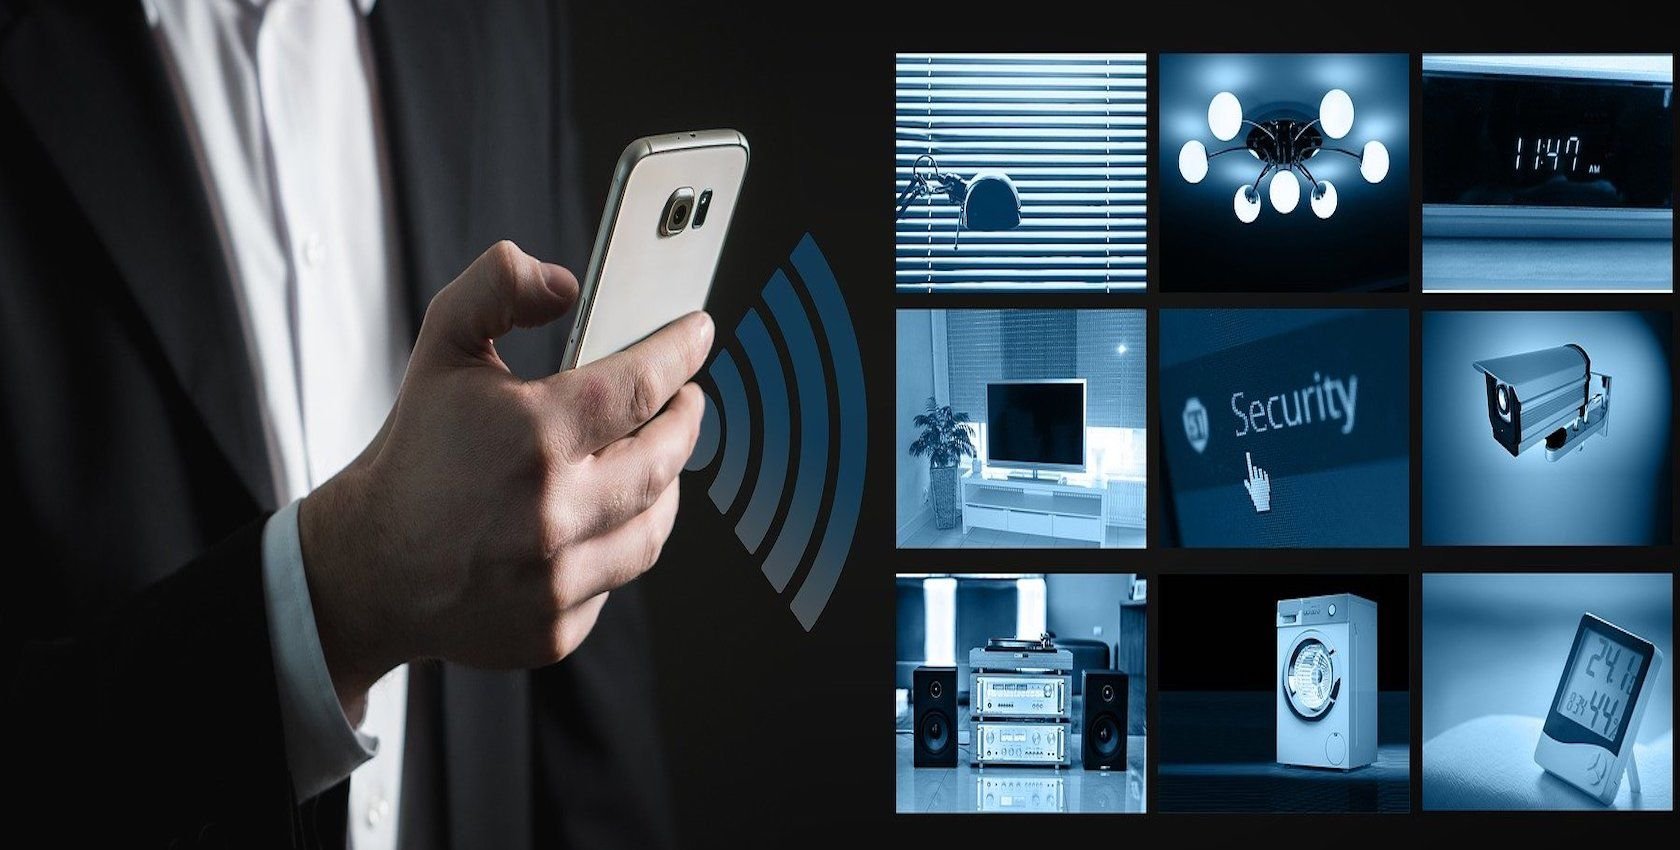 The 5 Biggest Smart Home Security Risks and How to Prevent Them